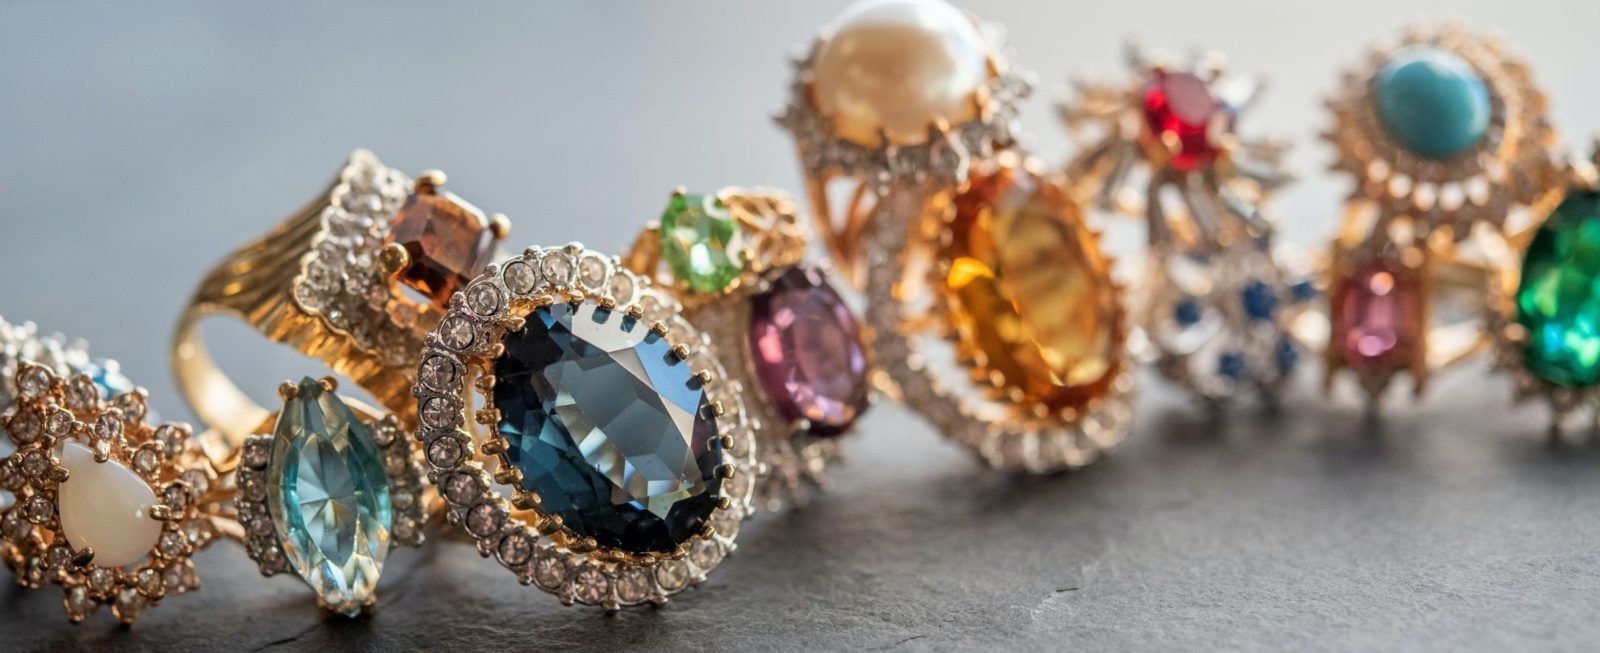 Jewellery you can buy according to your birthstone